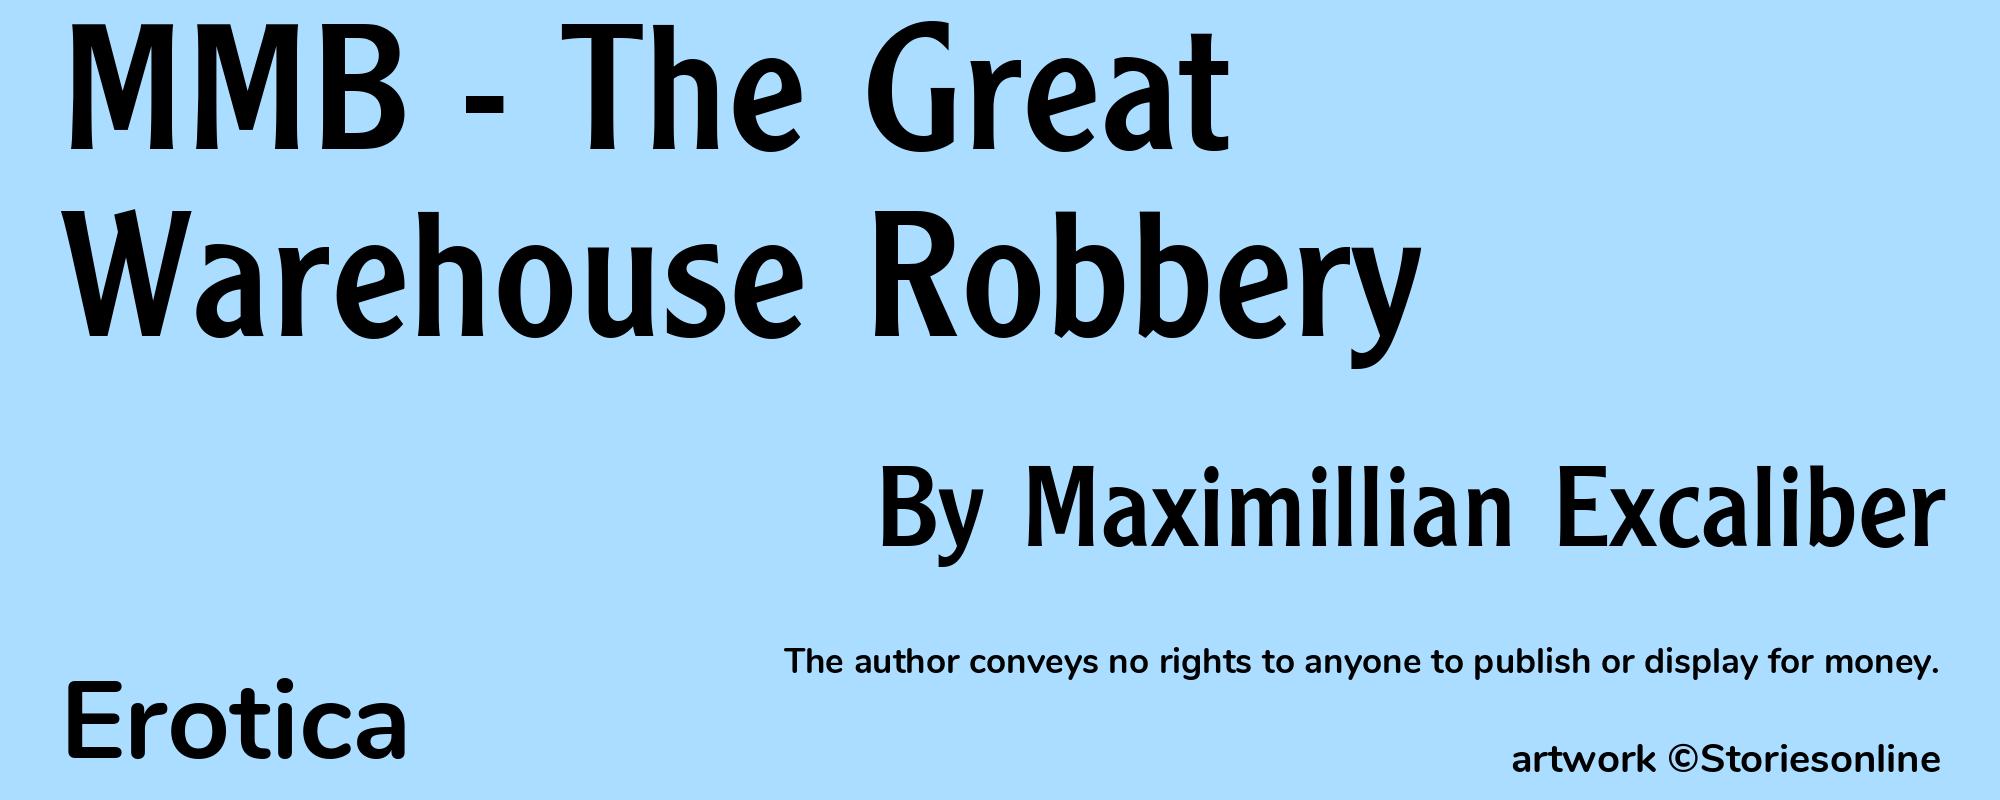 MMB - The Great Warehouse Robbery - Cover